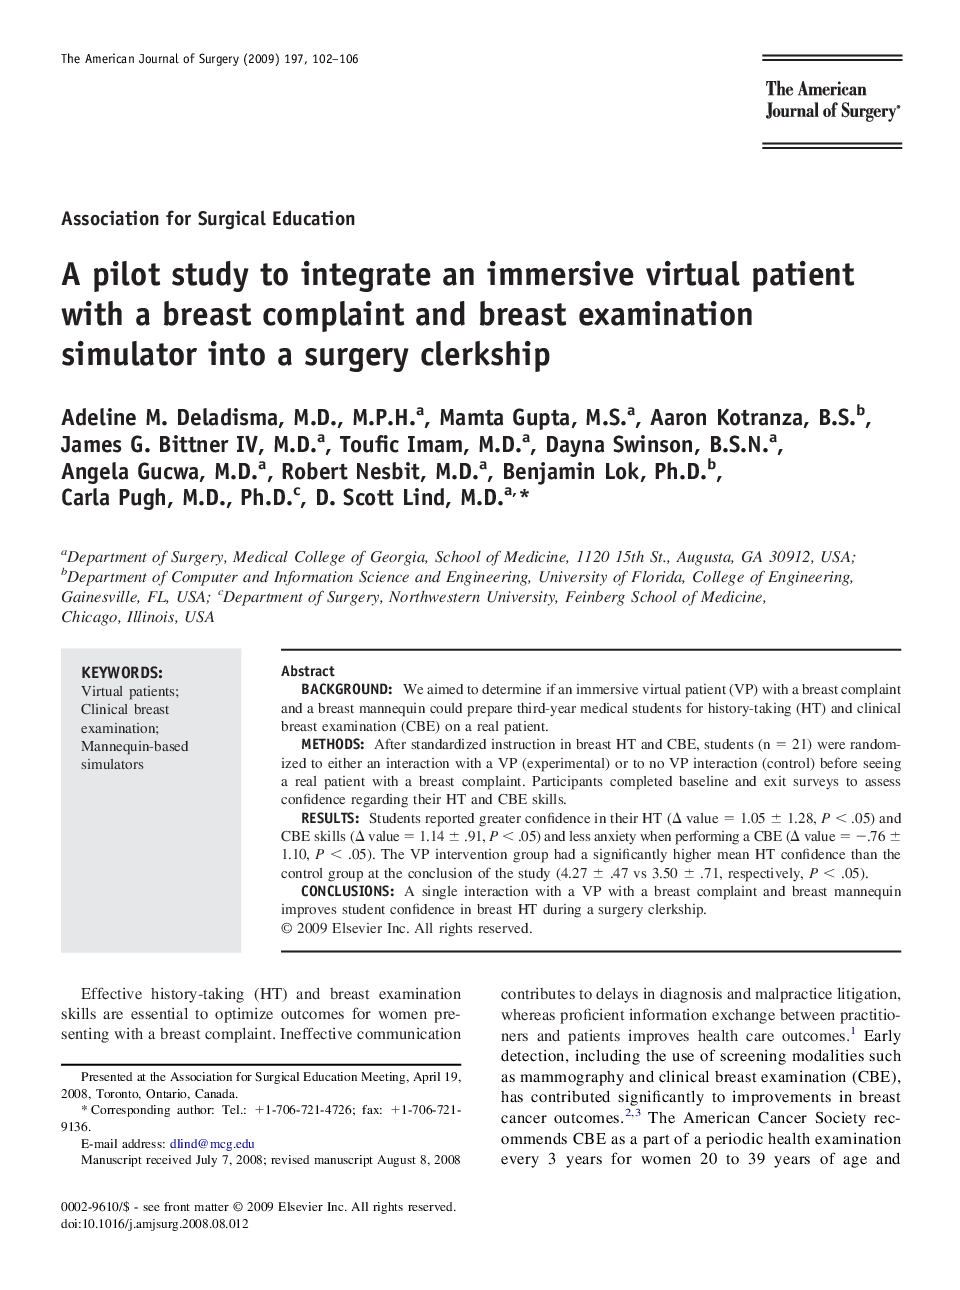 A pilot study to integrate an immersive virtual patient with a breast complaint and breast examination simulator into a surgery clerkship